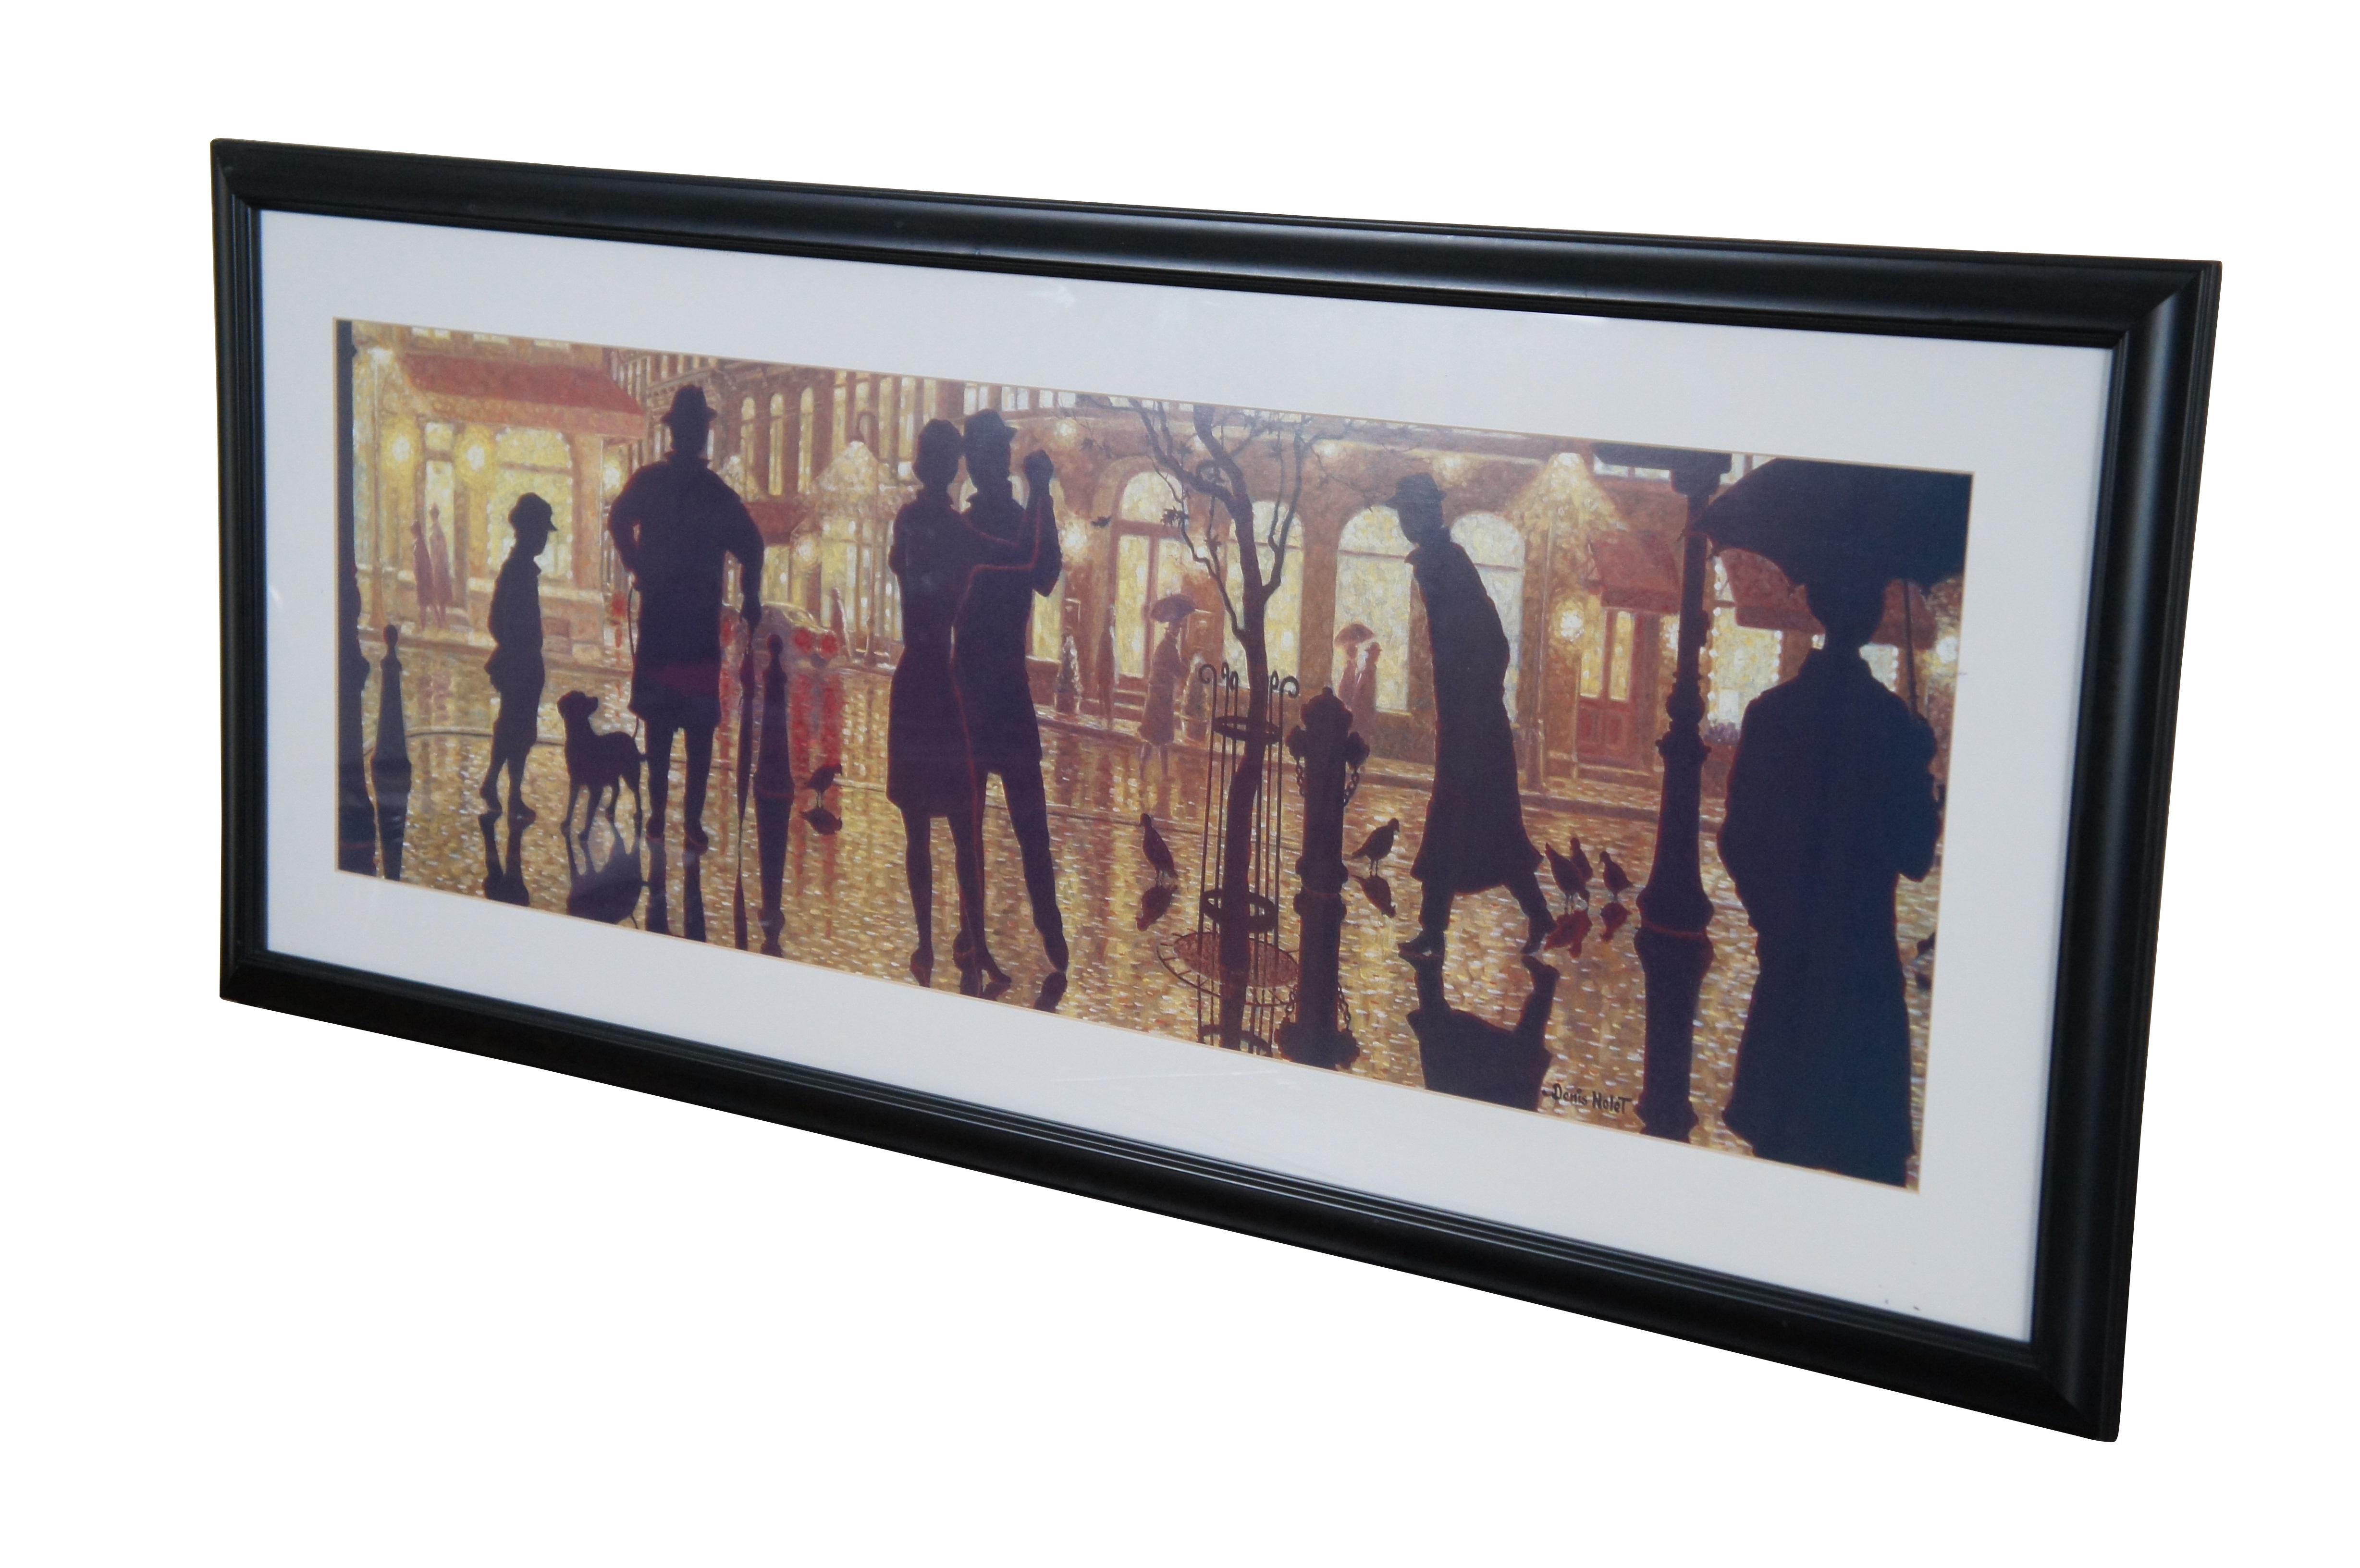 Framed art print of  “Les Premiers Pas” (The First Steps) by Denis Nolet, showing an evening street scene of figures walking and dancing in the rain, silhouetted against golden street lamps.

“Denis Nolet (Born 1964) is active/lives in Canada. Denis